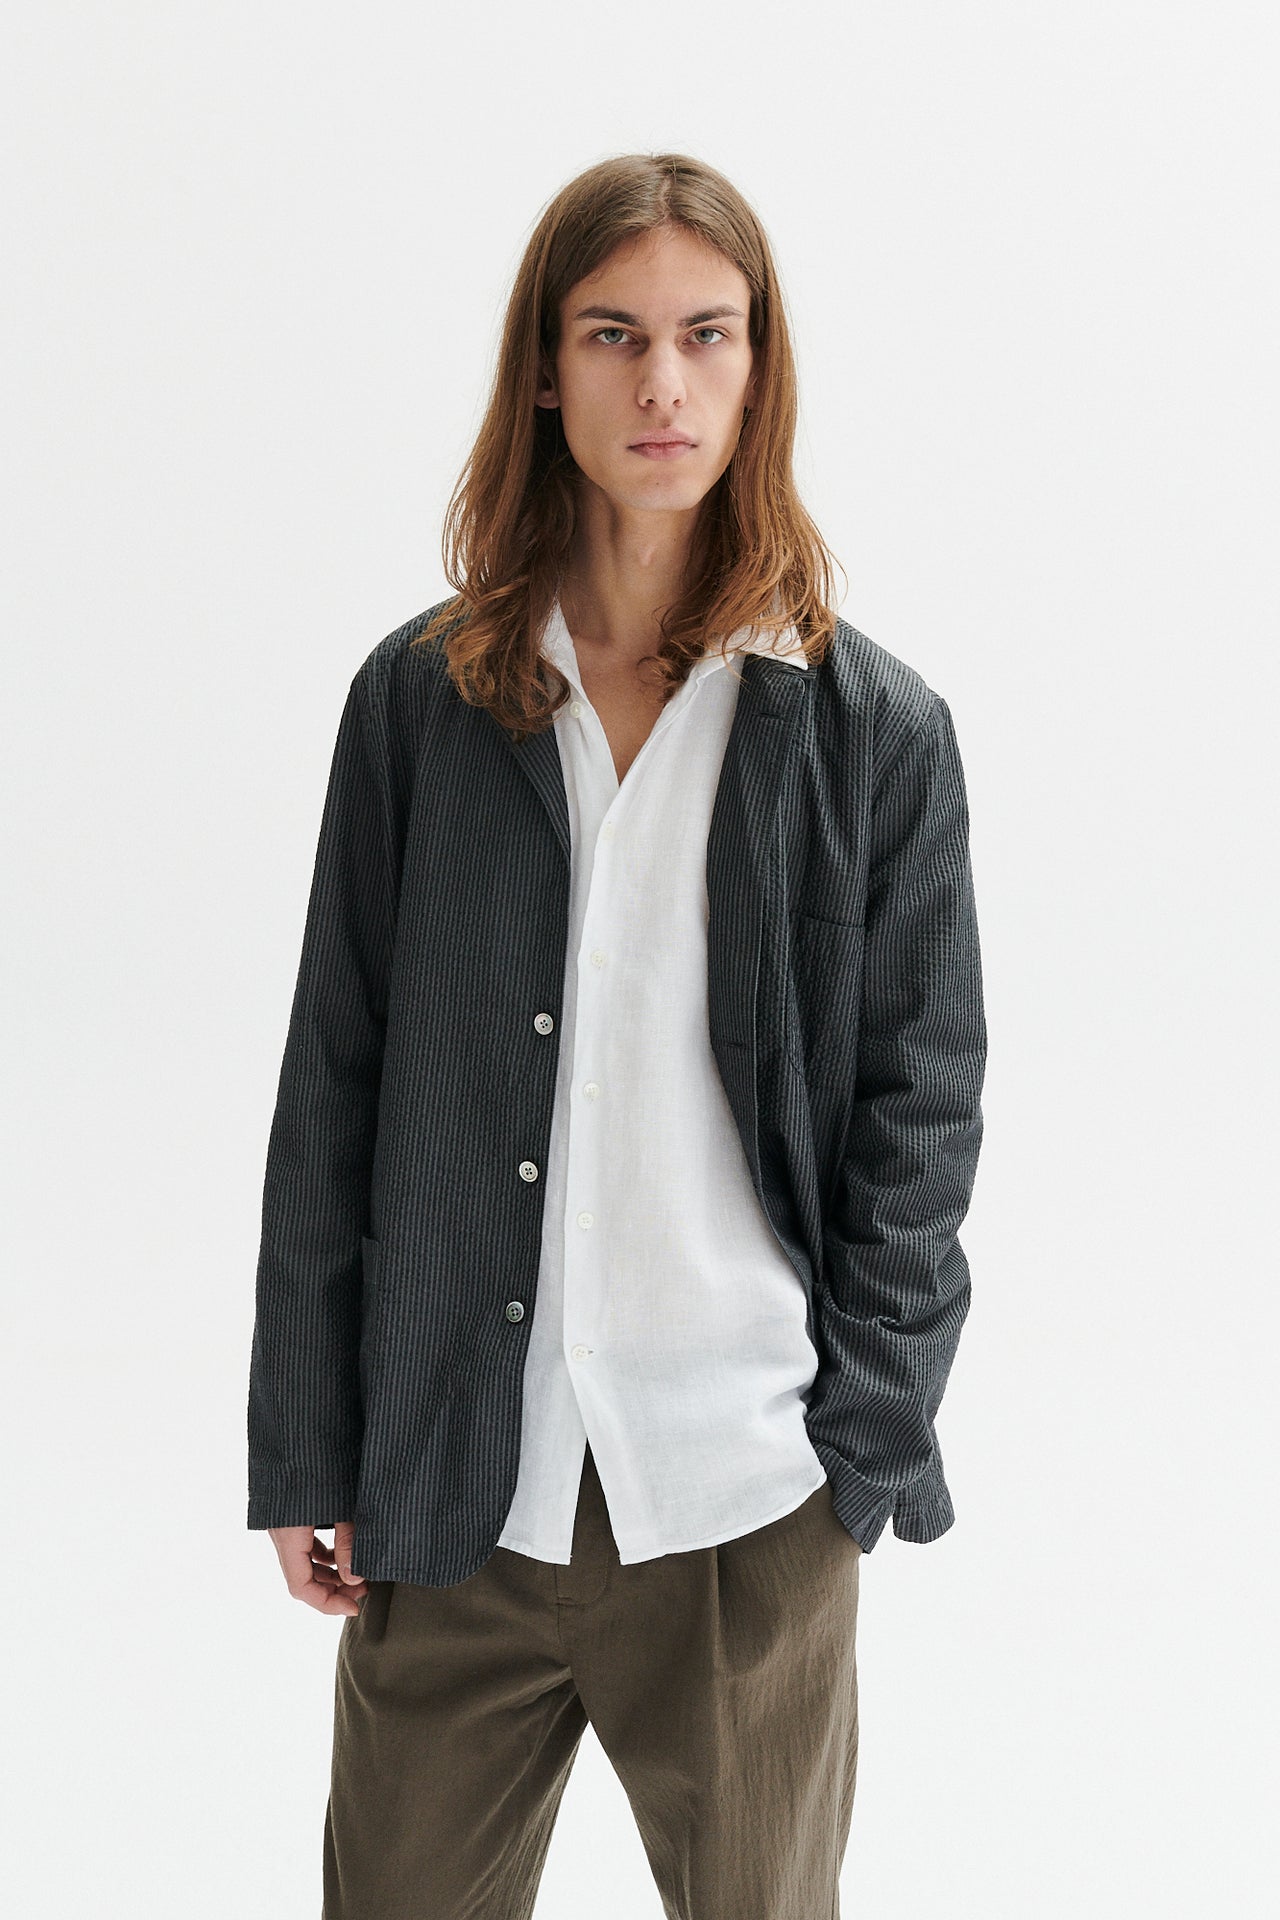 Sporting Jacket and Overshirt in a Subtle Grey Striped Portuguese Cotton Seersucker